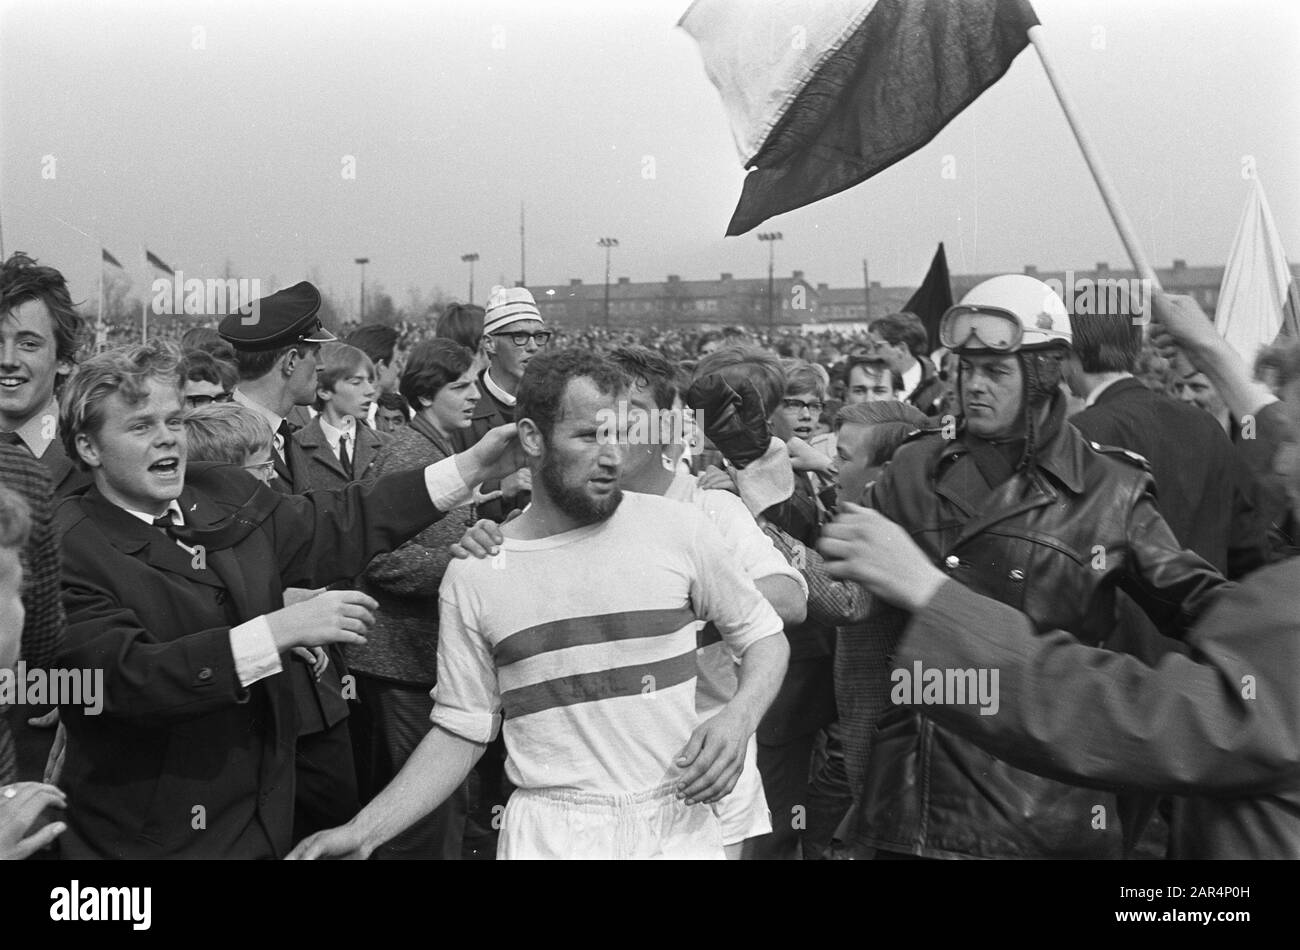 Elinkwijk against DOS 0-2, Aarts of DOS booed by supporters Date: April 30, 1967 Keywords: SUPPORTERS, sport, football Stock Photo